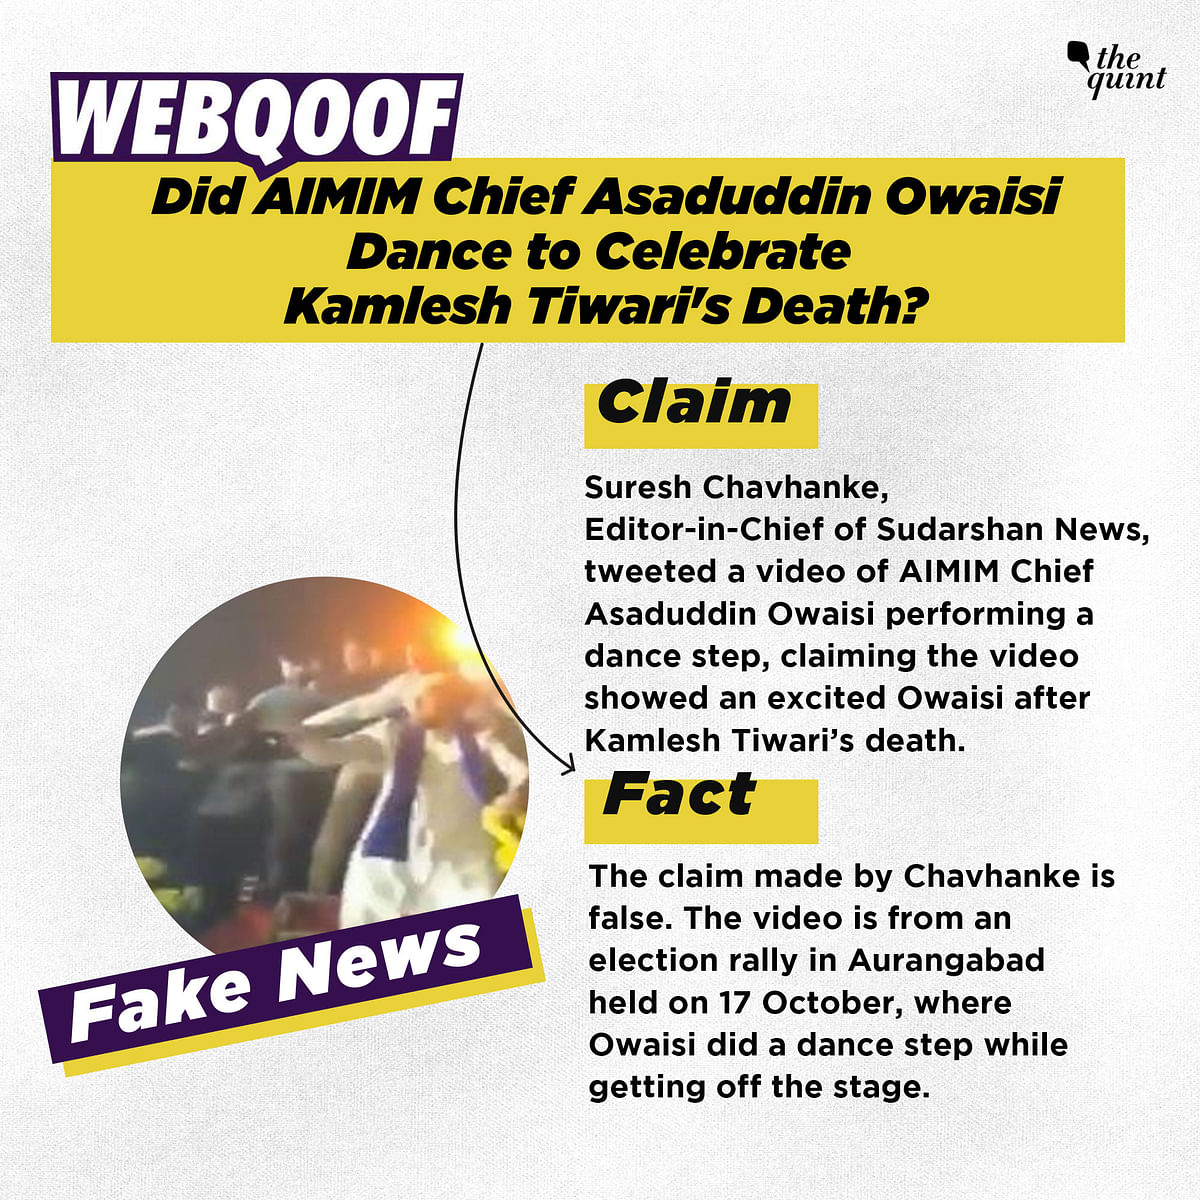 The video is actually from Owaisi’s rally in Aurangabad which was held on 17 October. 